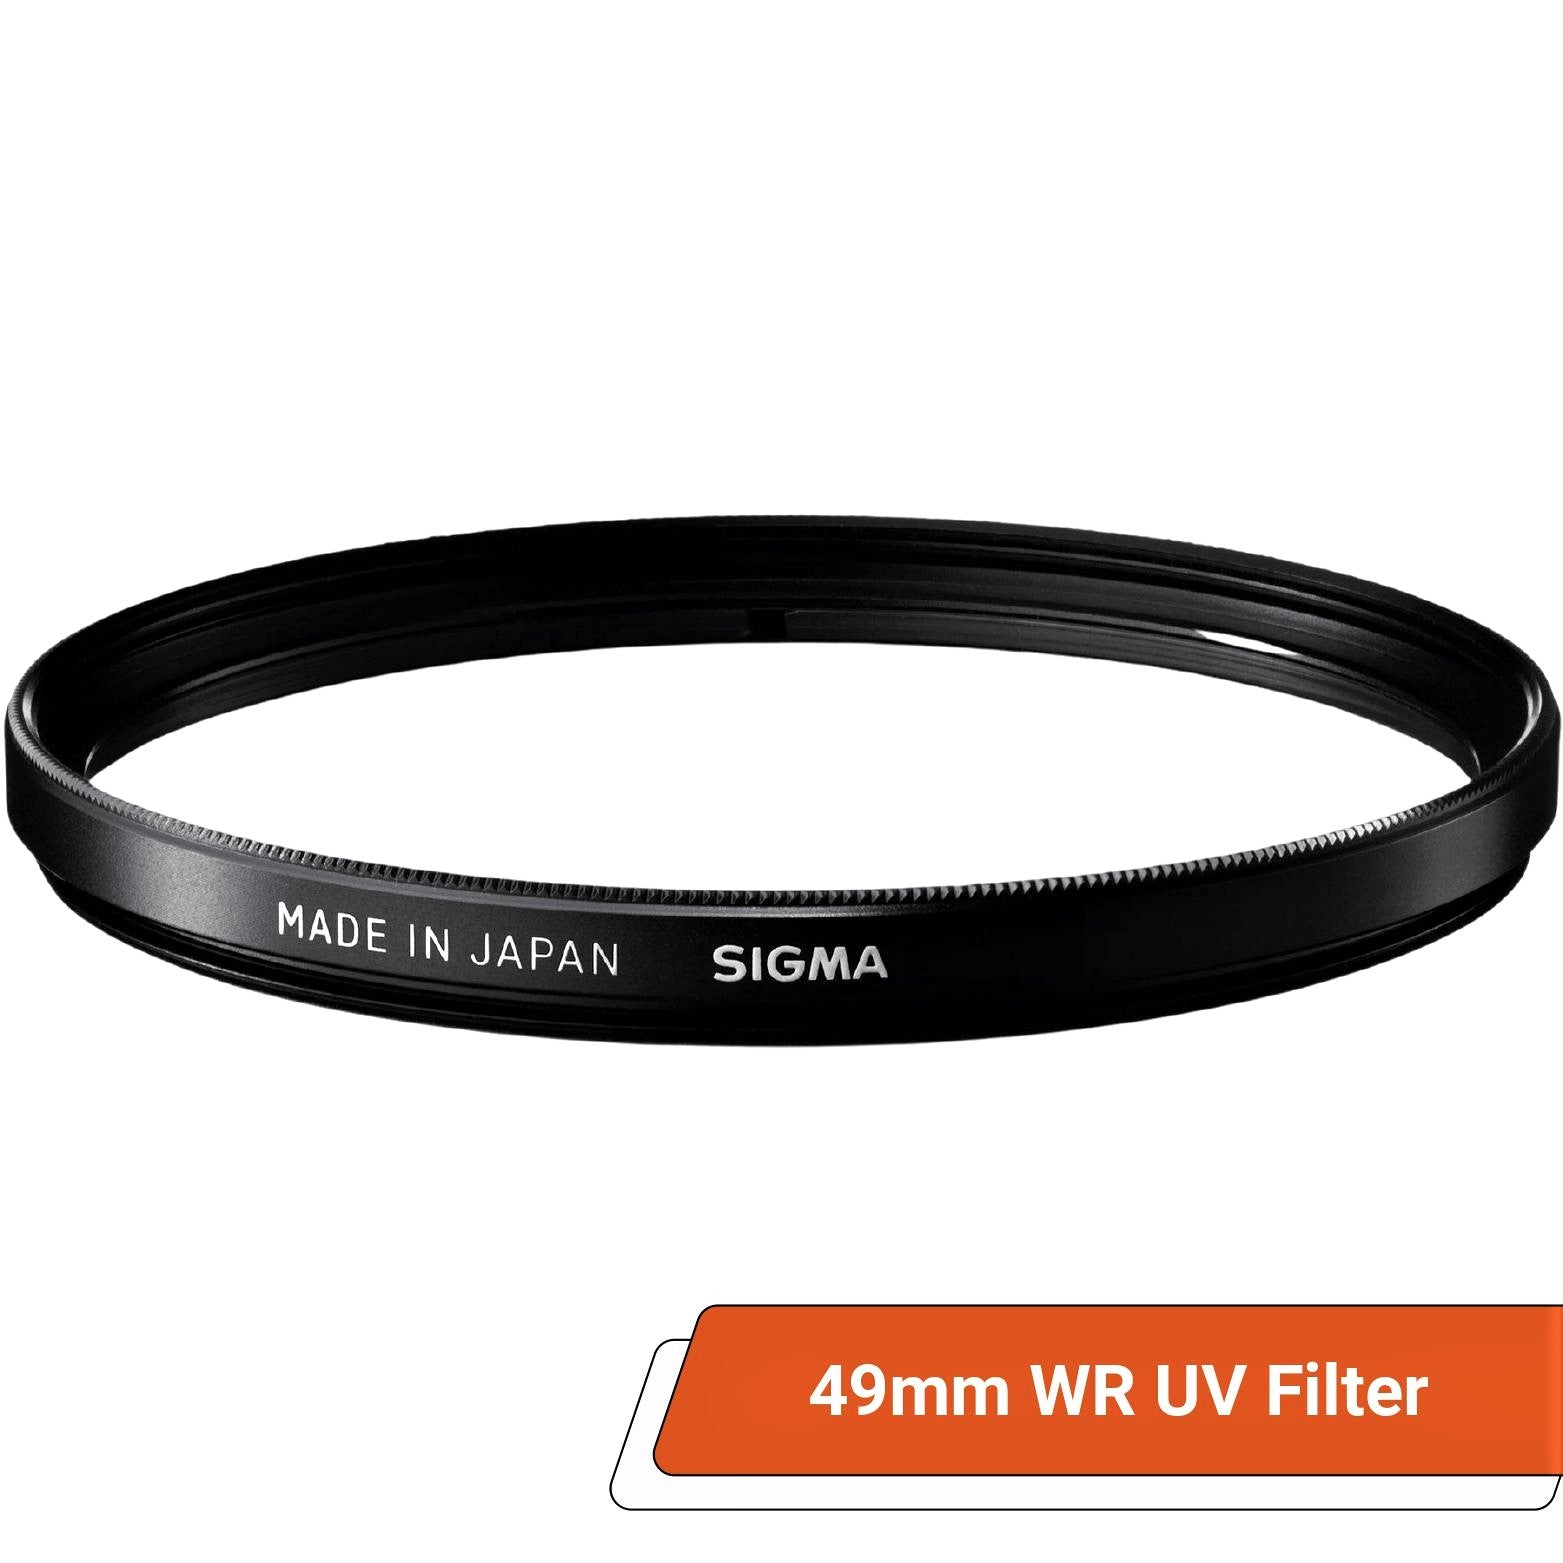 Sigma WR (Water Repellent) Ceramic Protector Filter